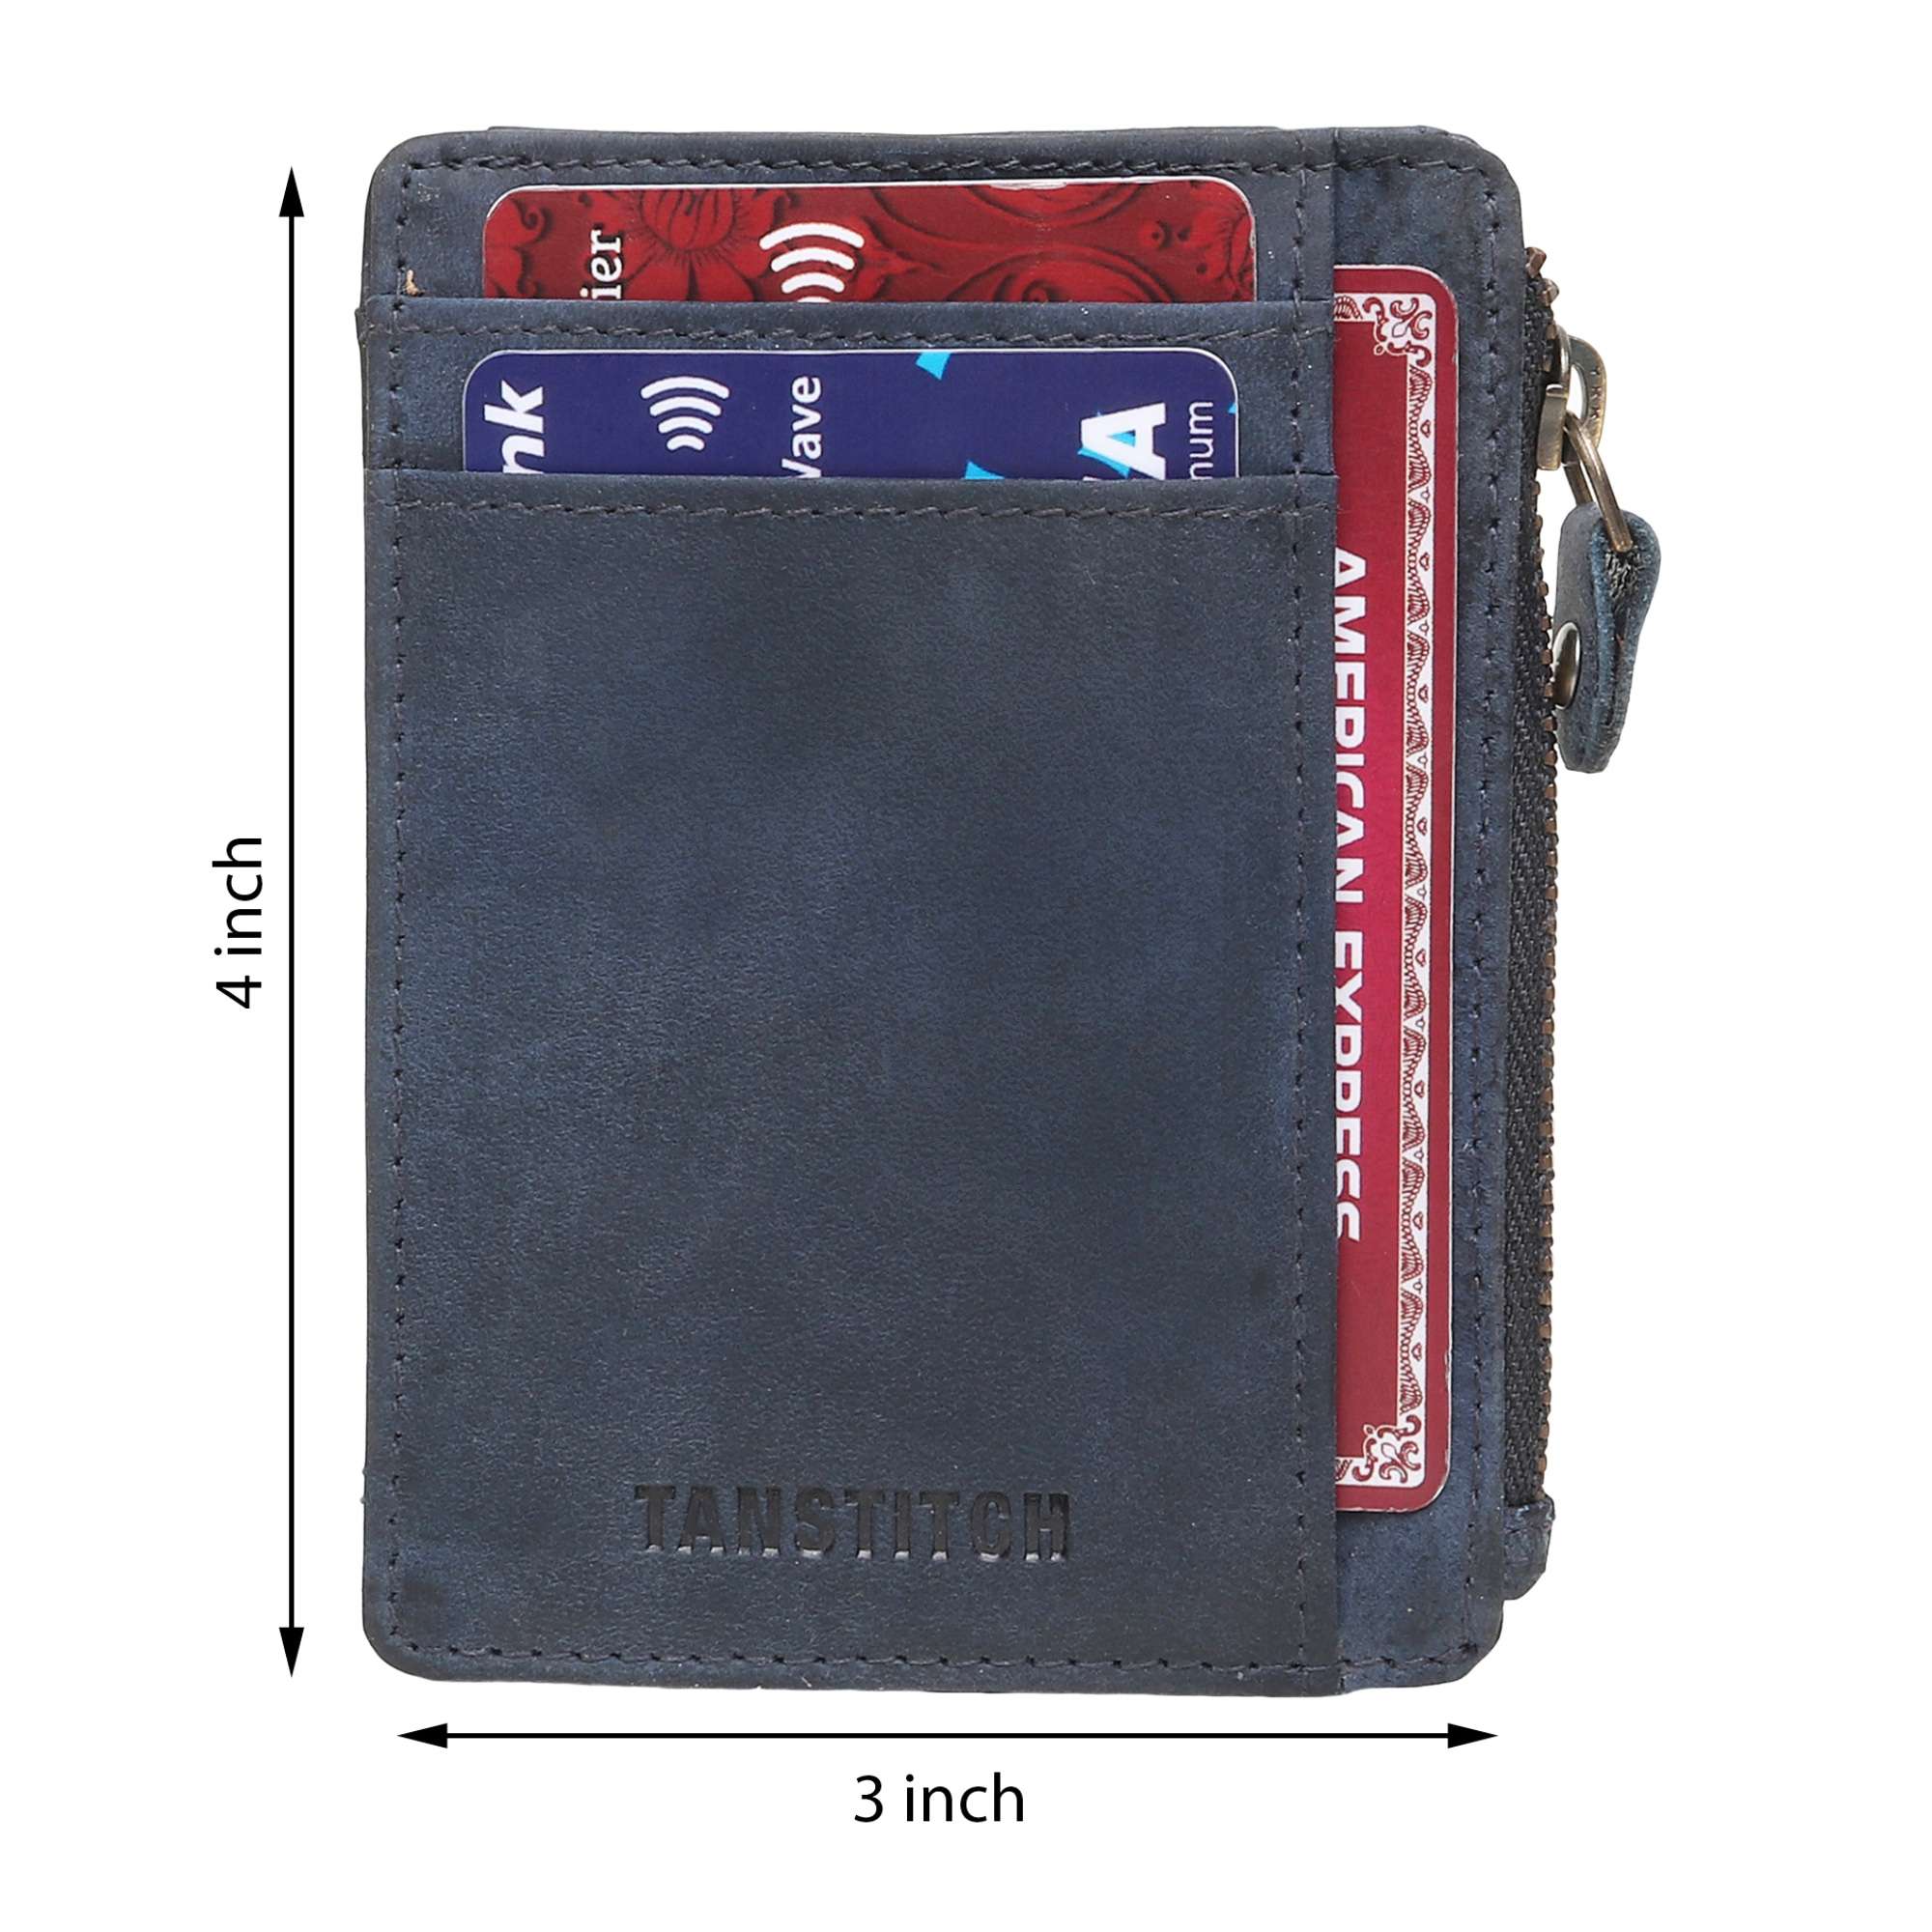 TANSTITCH Bifold Card Holder | Full Grain Leather | Compact Size ...